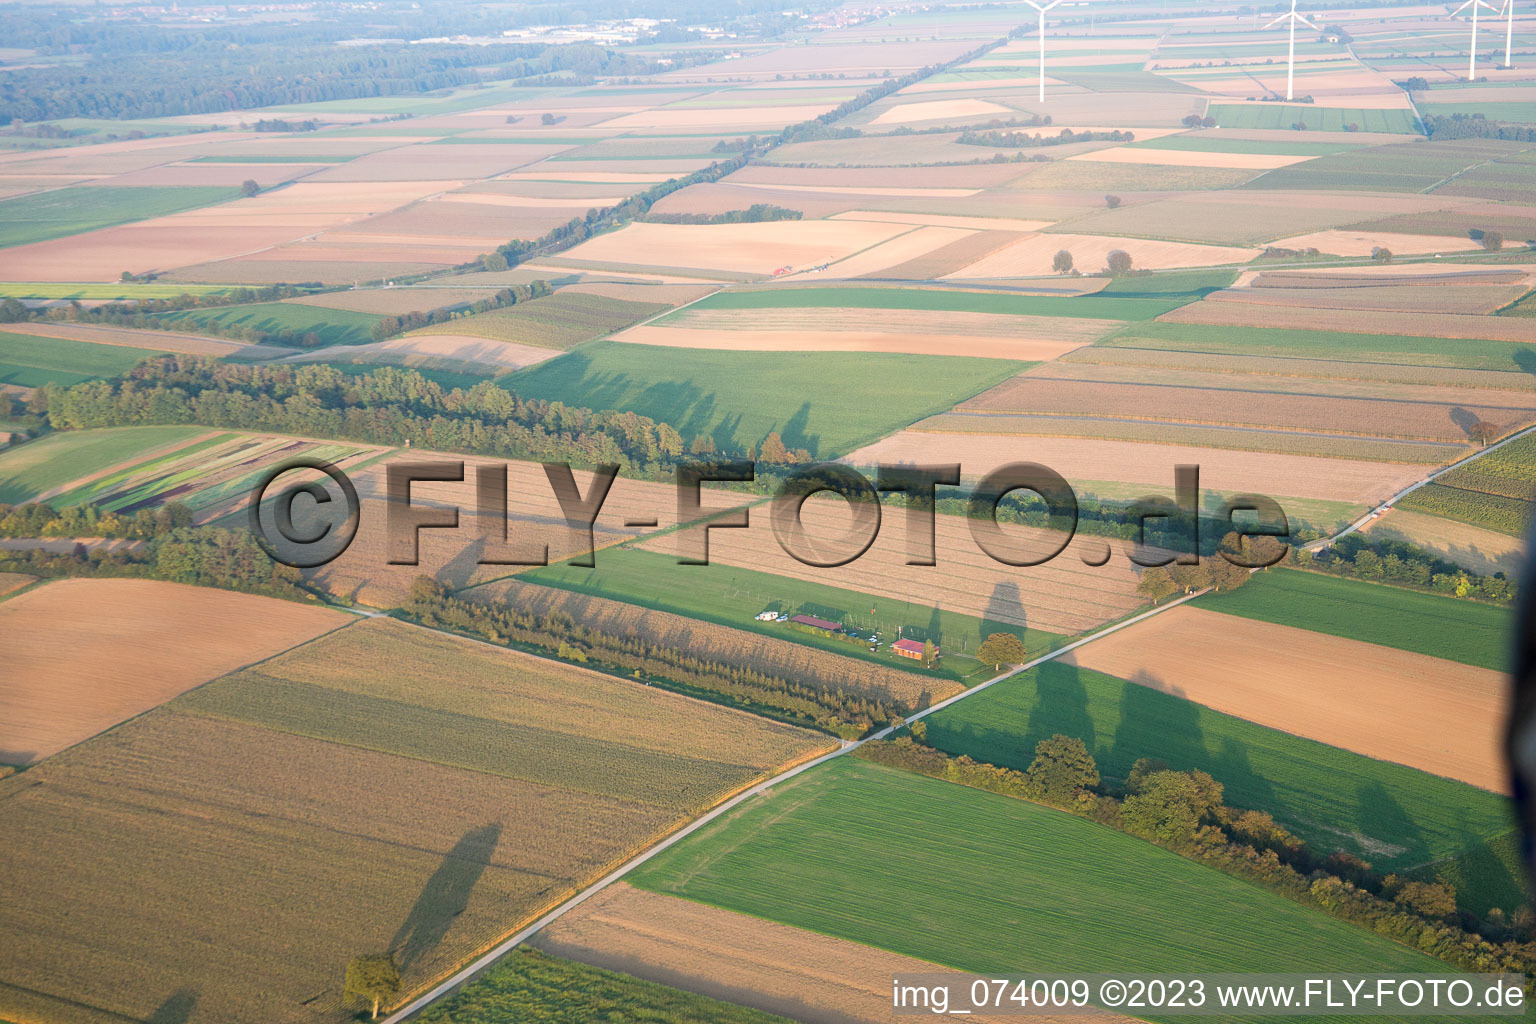 Aerial view of Model airfield in Freckenfeld in the state Rhineland-Palatinate, Germany